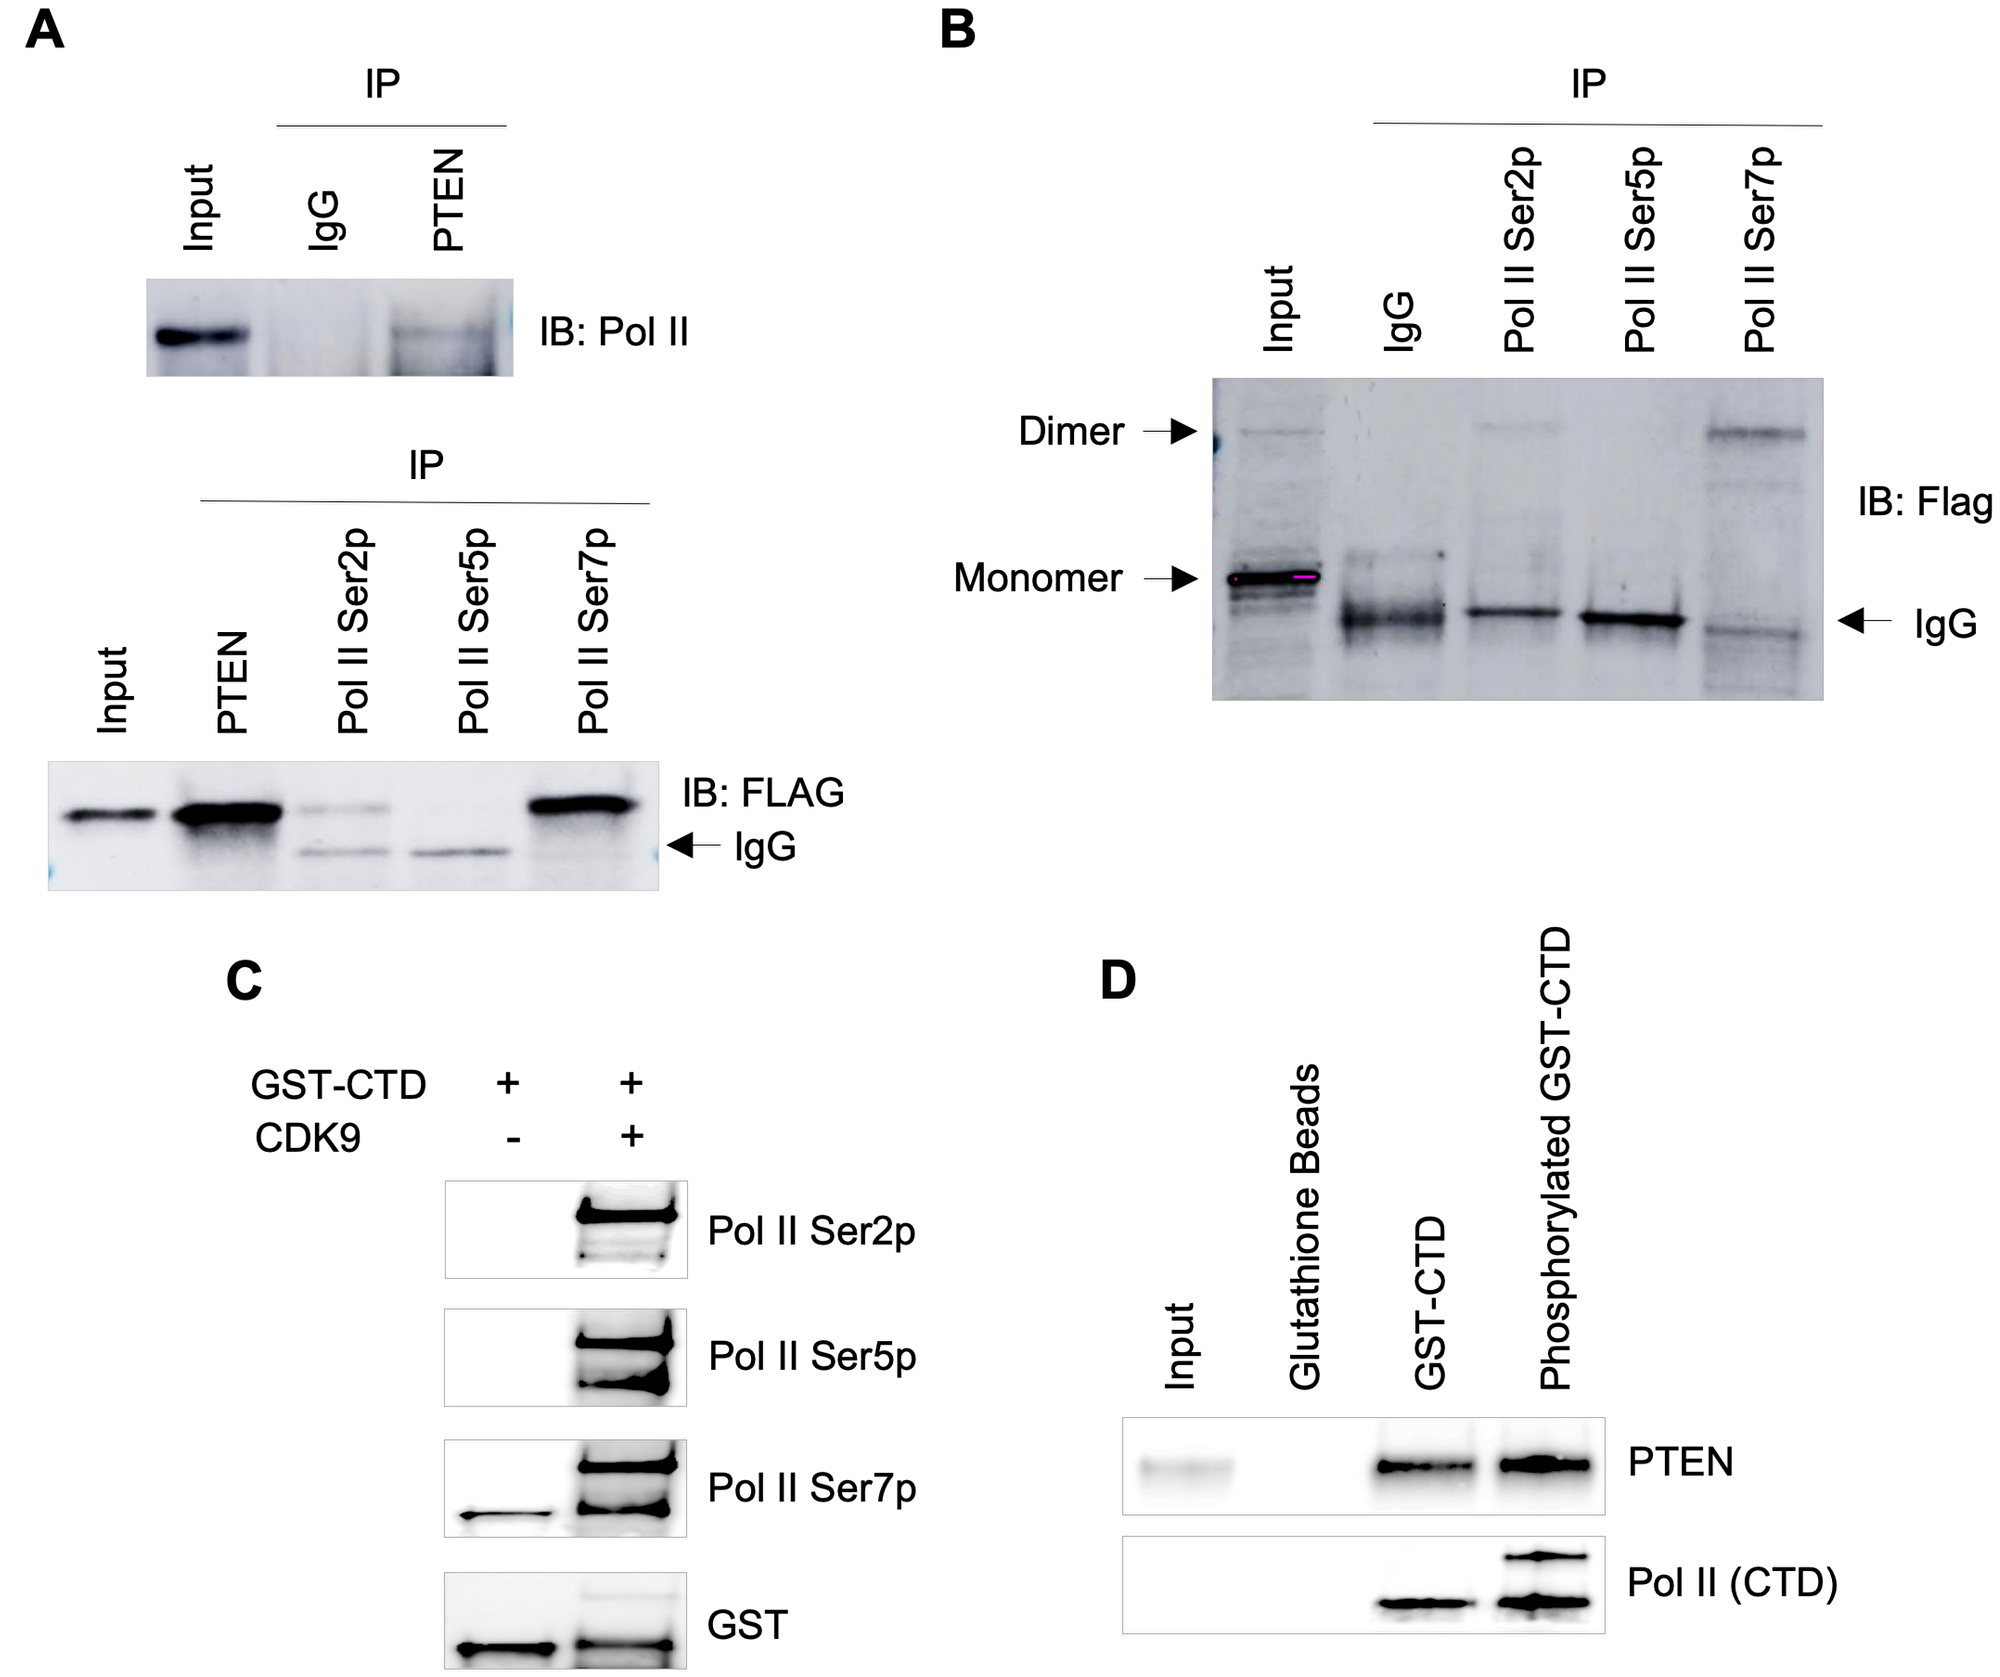 Association of PTEN with RNA Pol II transcription machinery.